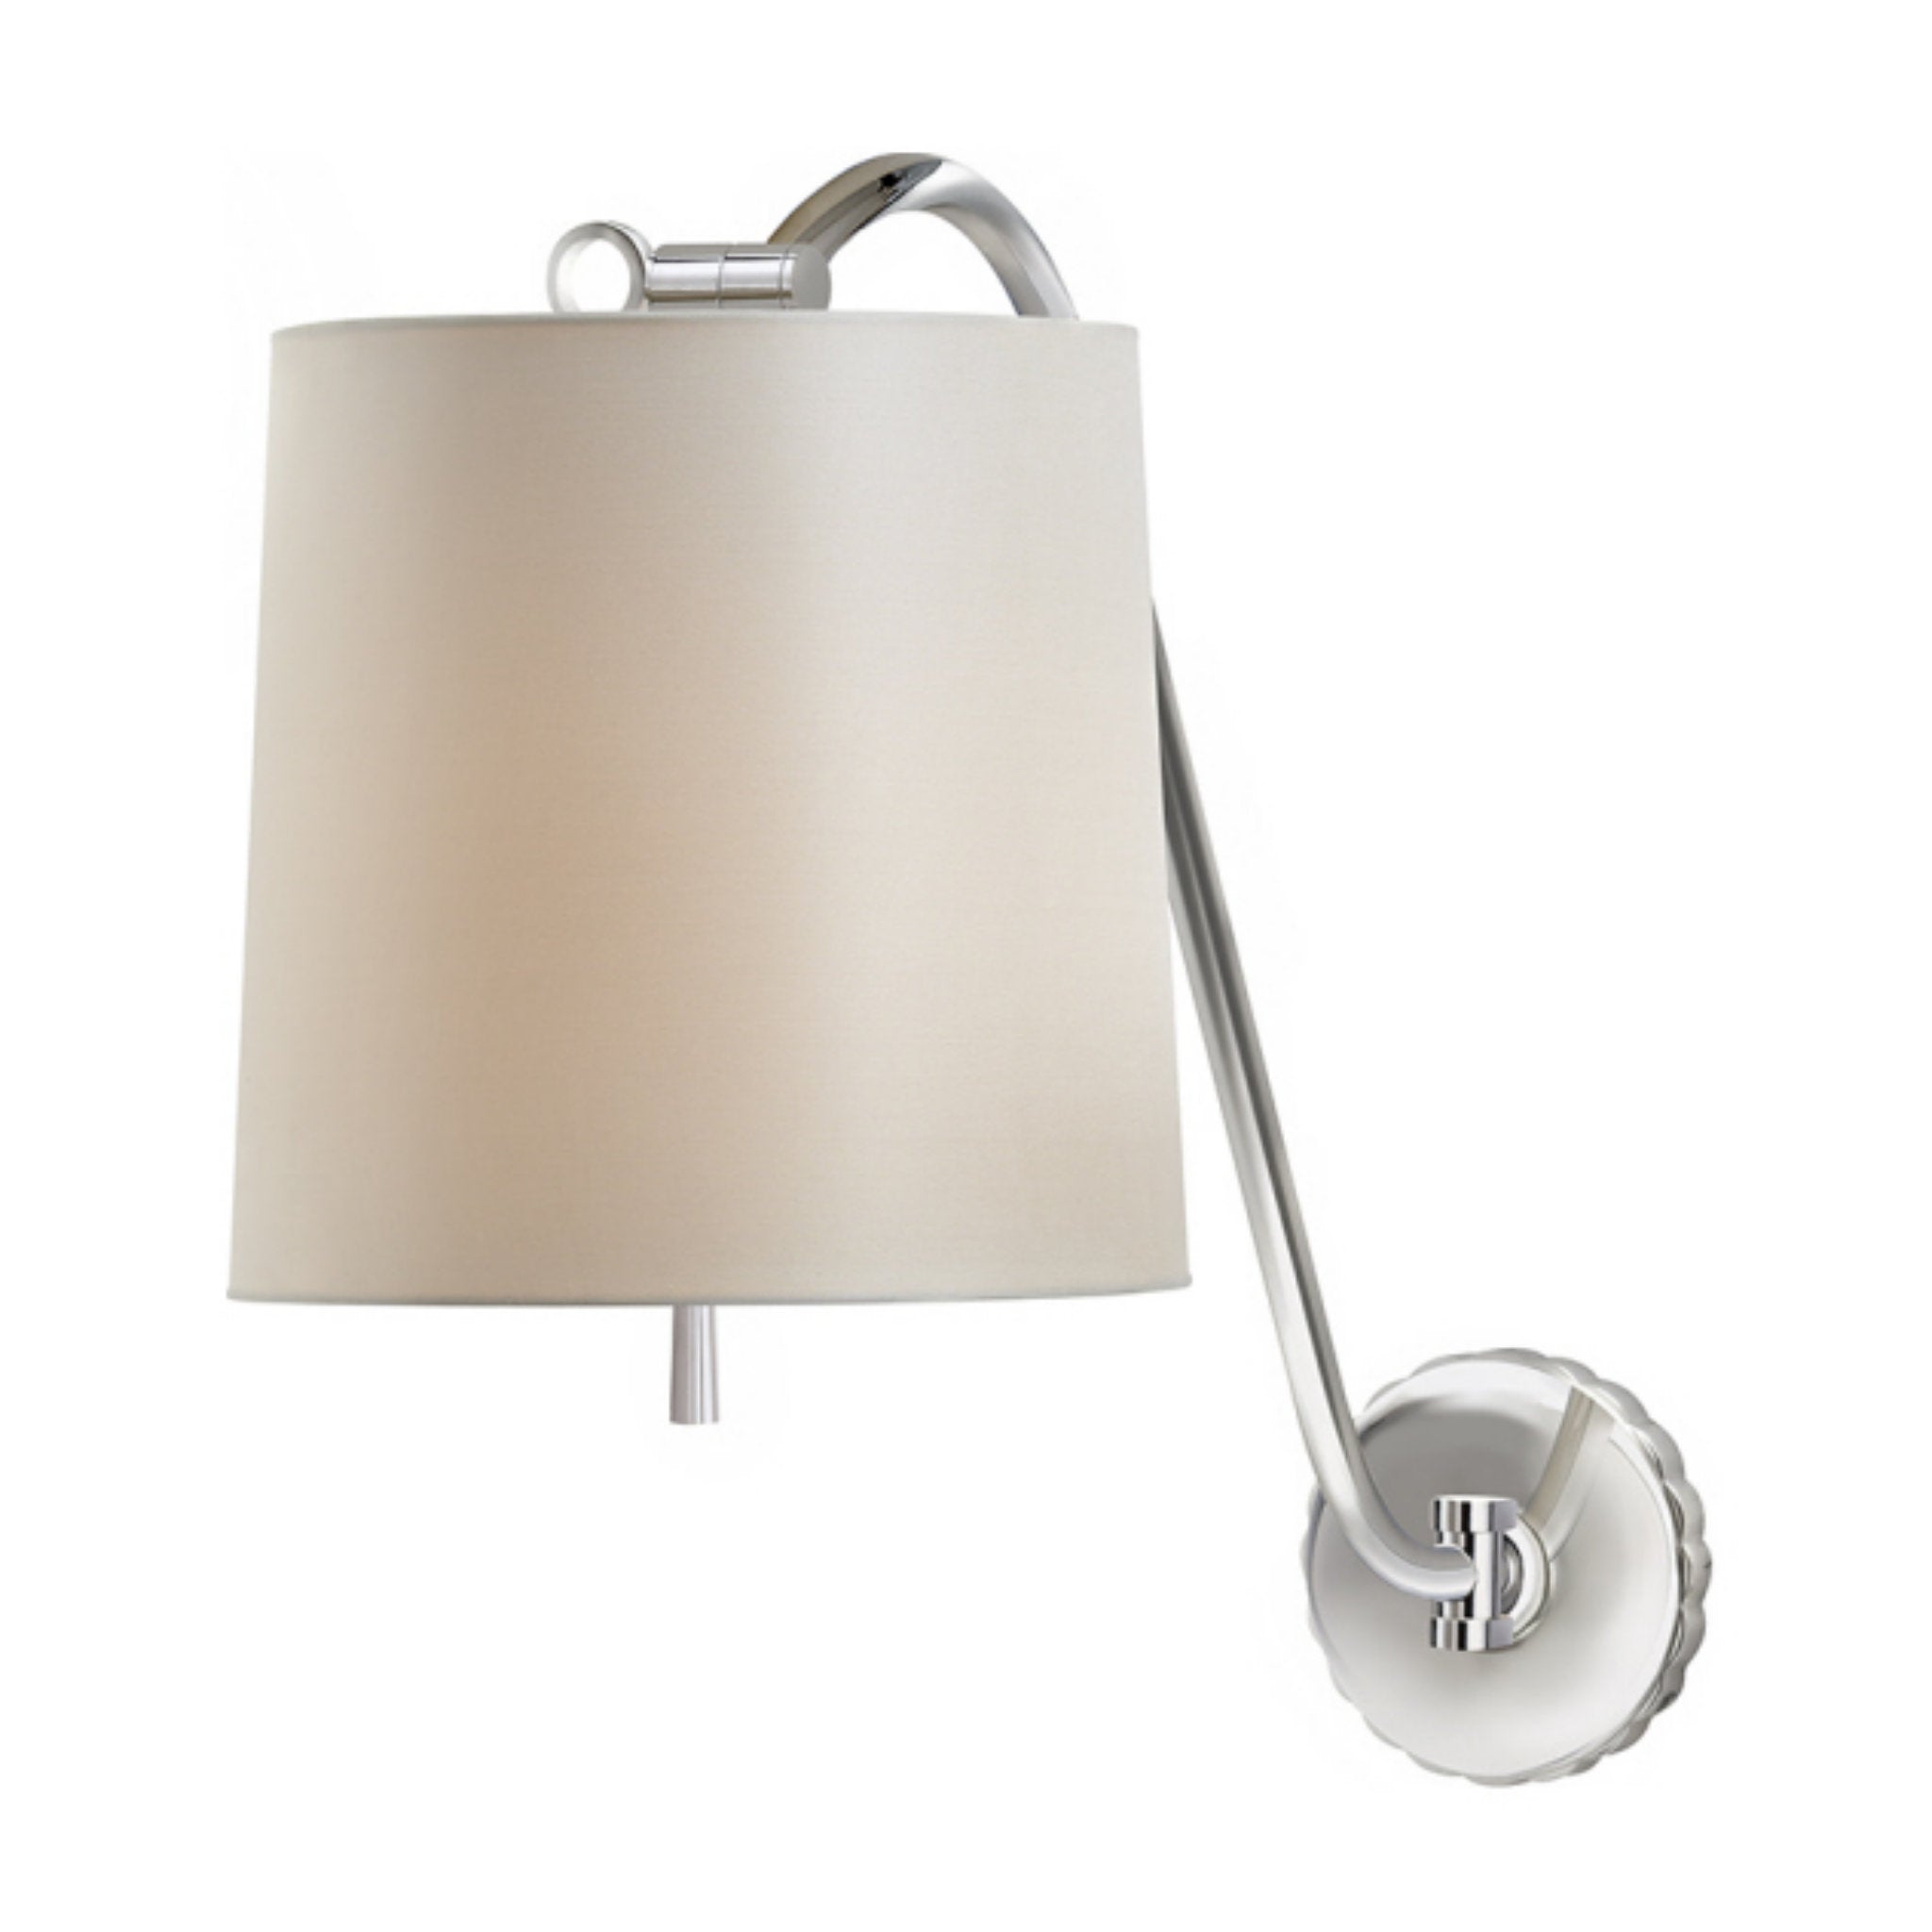 Barbara Barry Understudy Sconce in Polished Nickel with Silk Shade